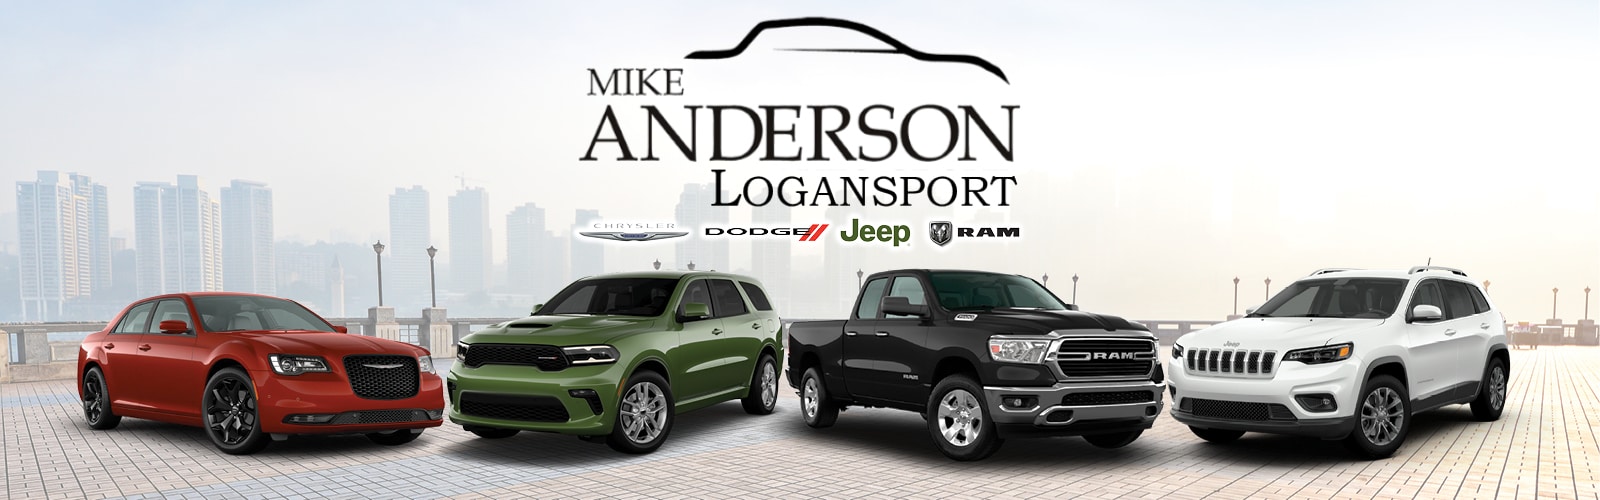 Mike Anderson Chrysler Dodge Jeep Ram